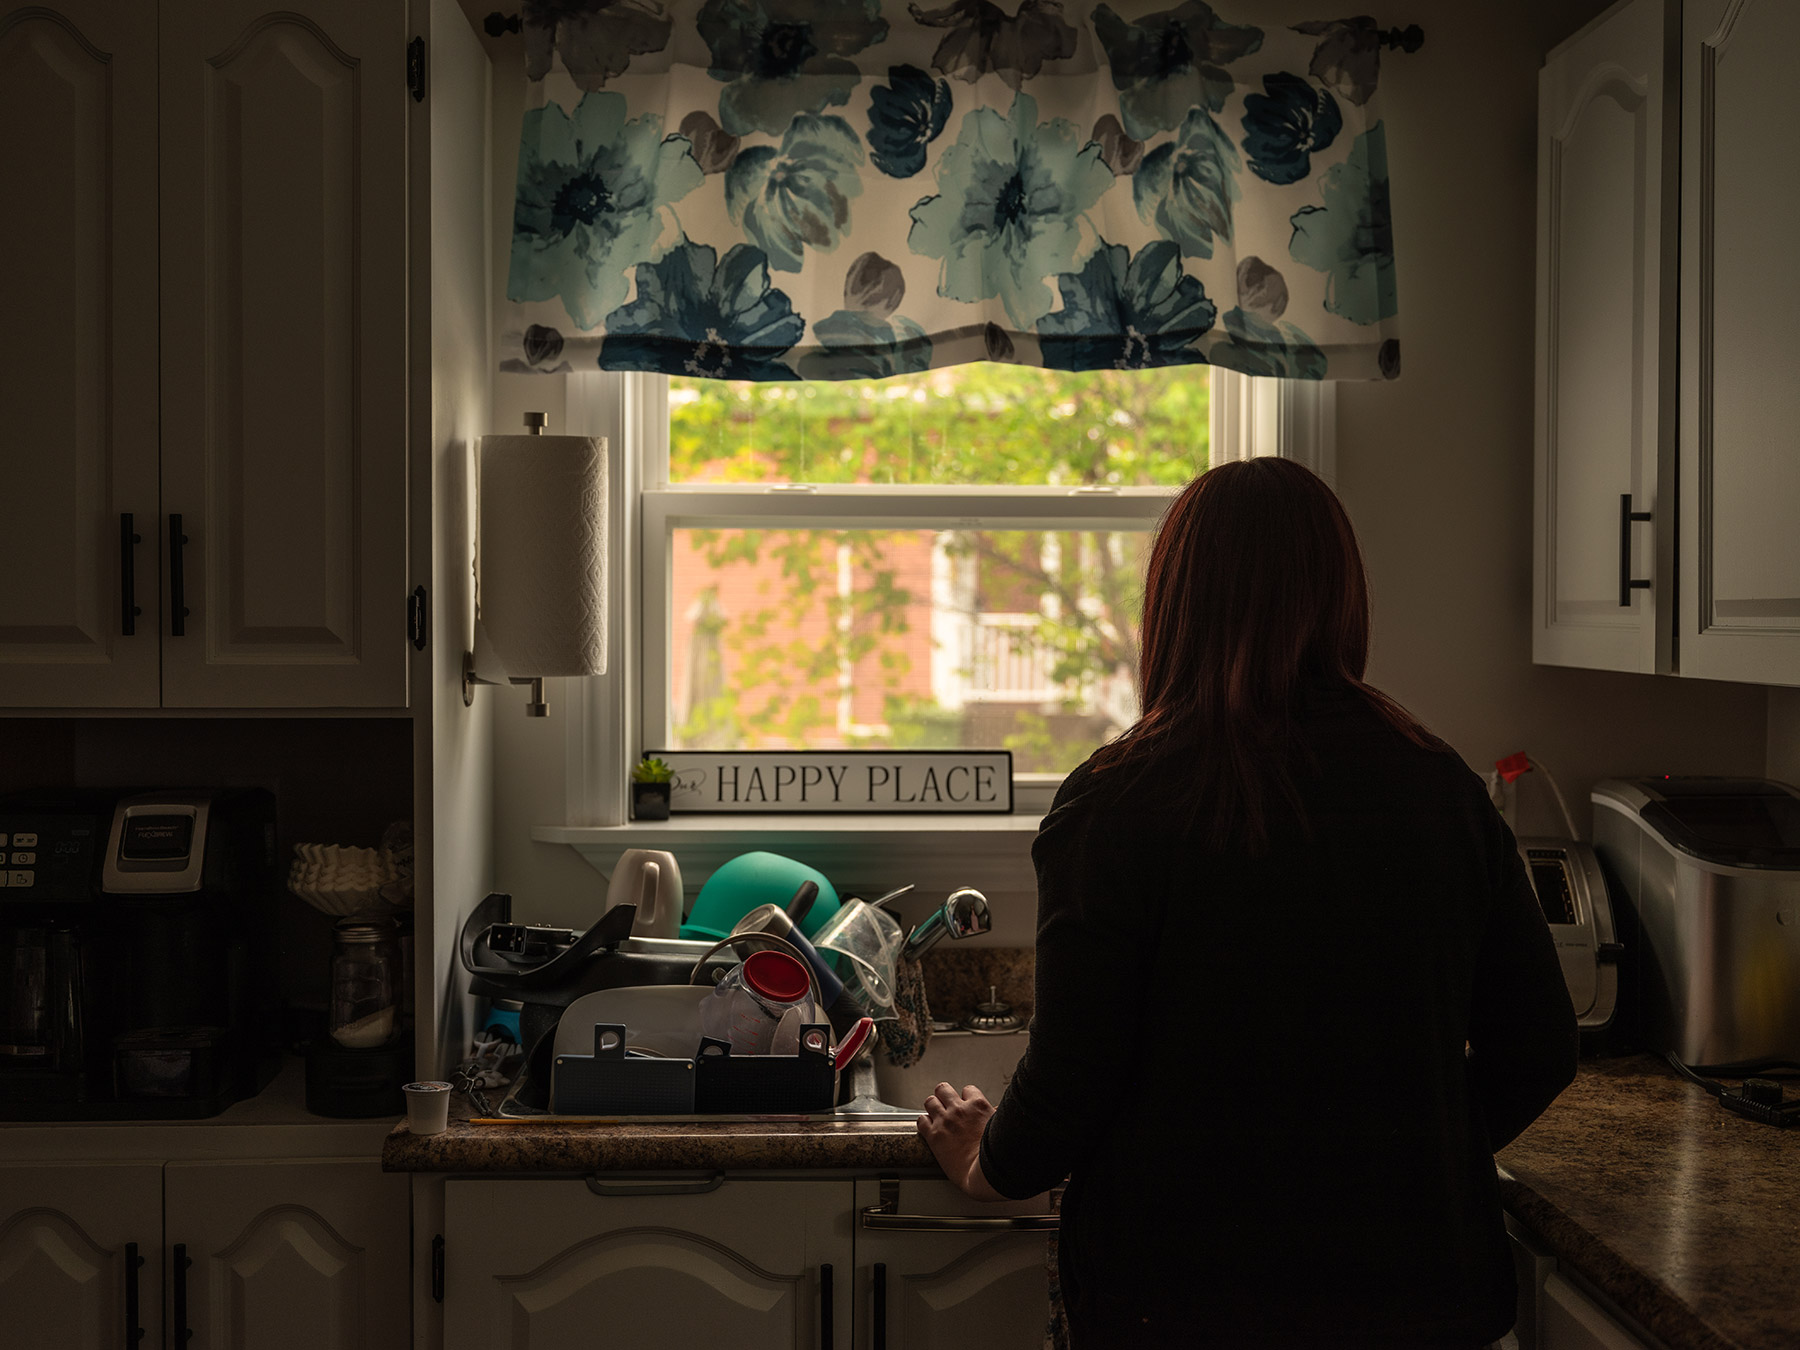 Photo of Jane Doe standing in her kitchen. She is facing away from the camera, looking out the window above the sink.